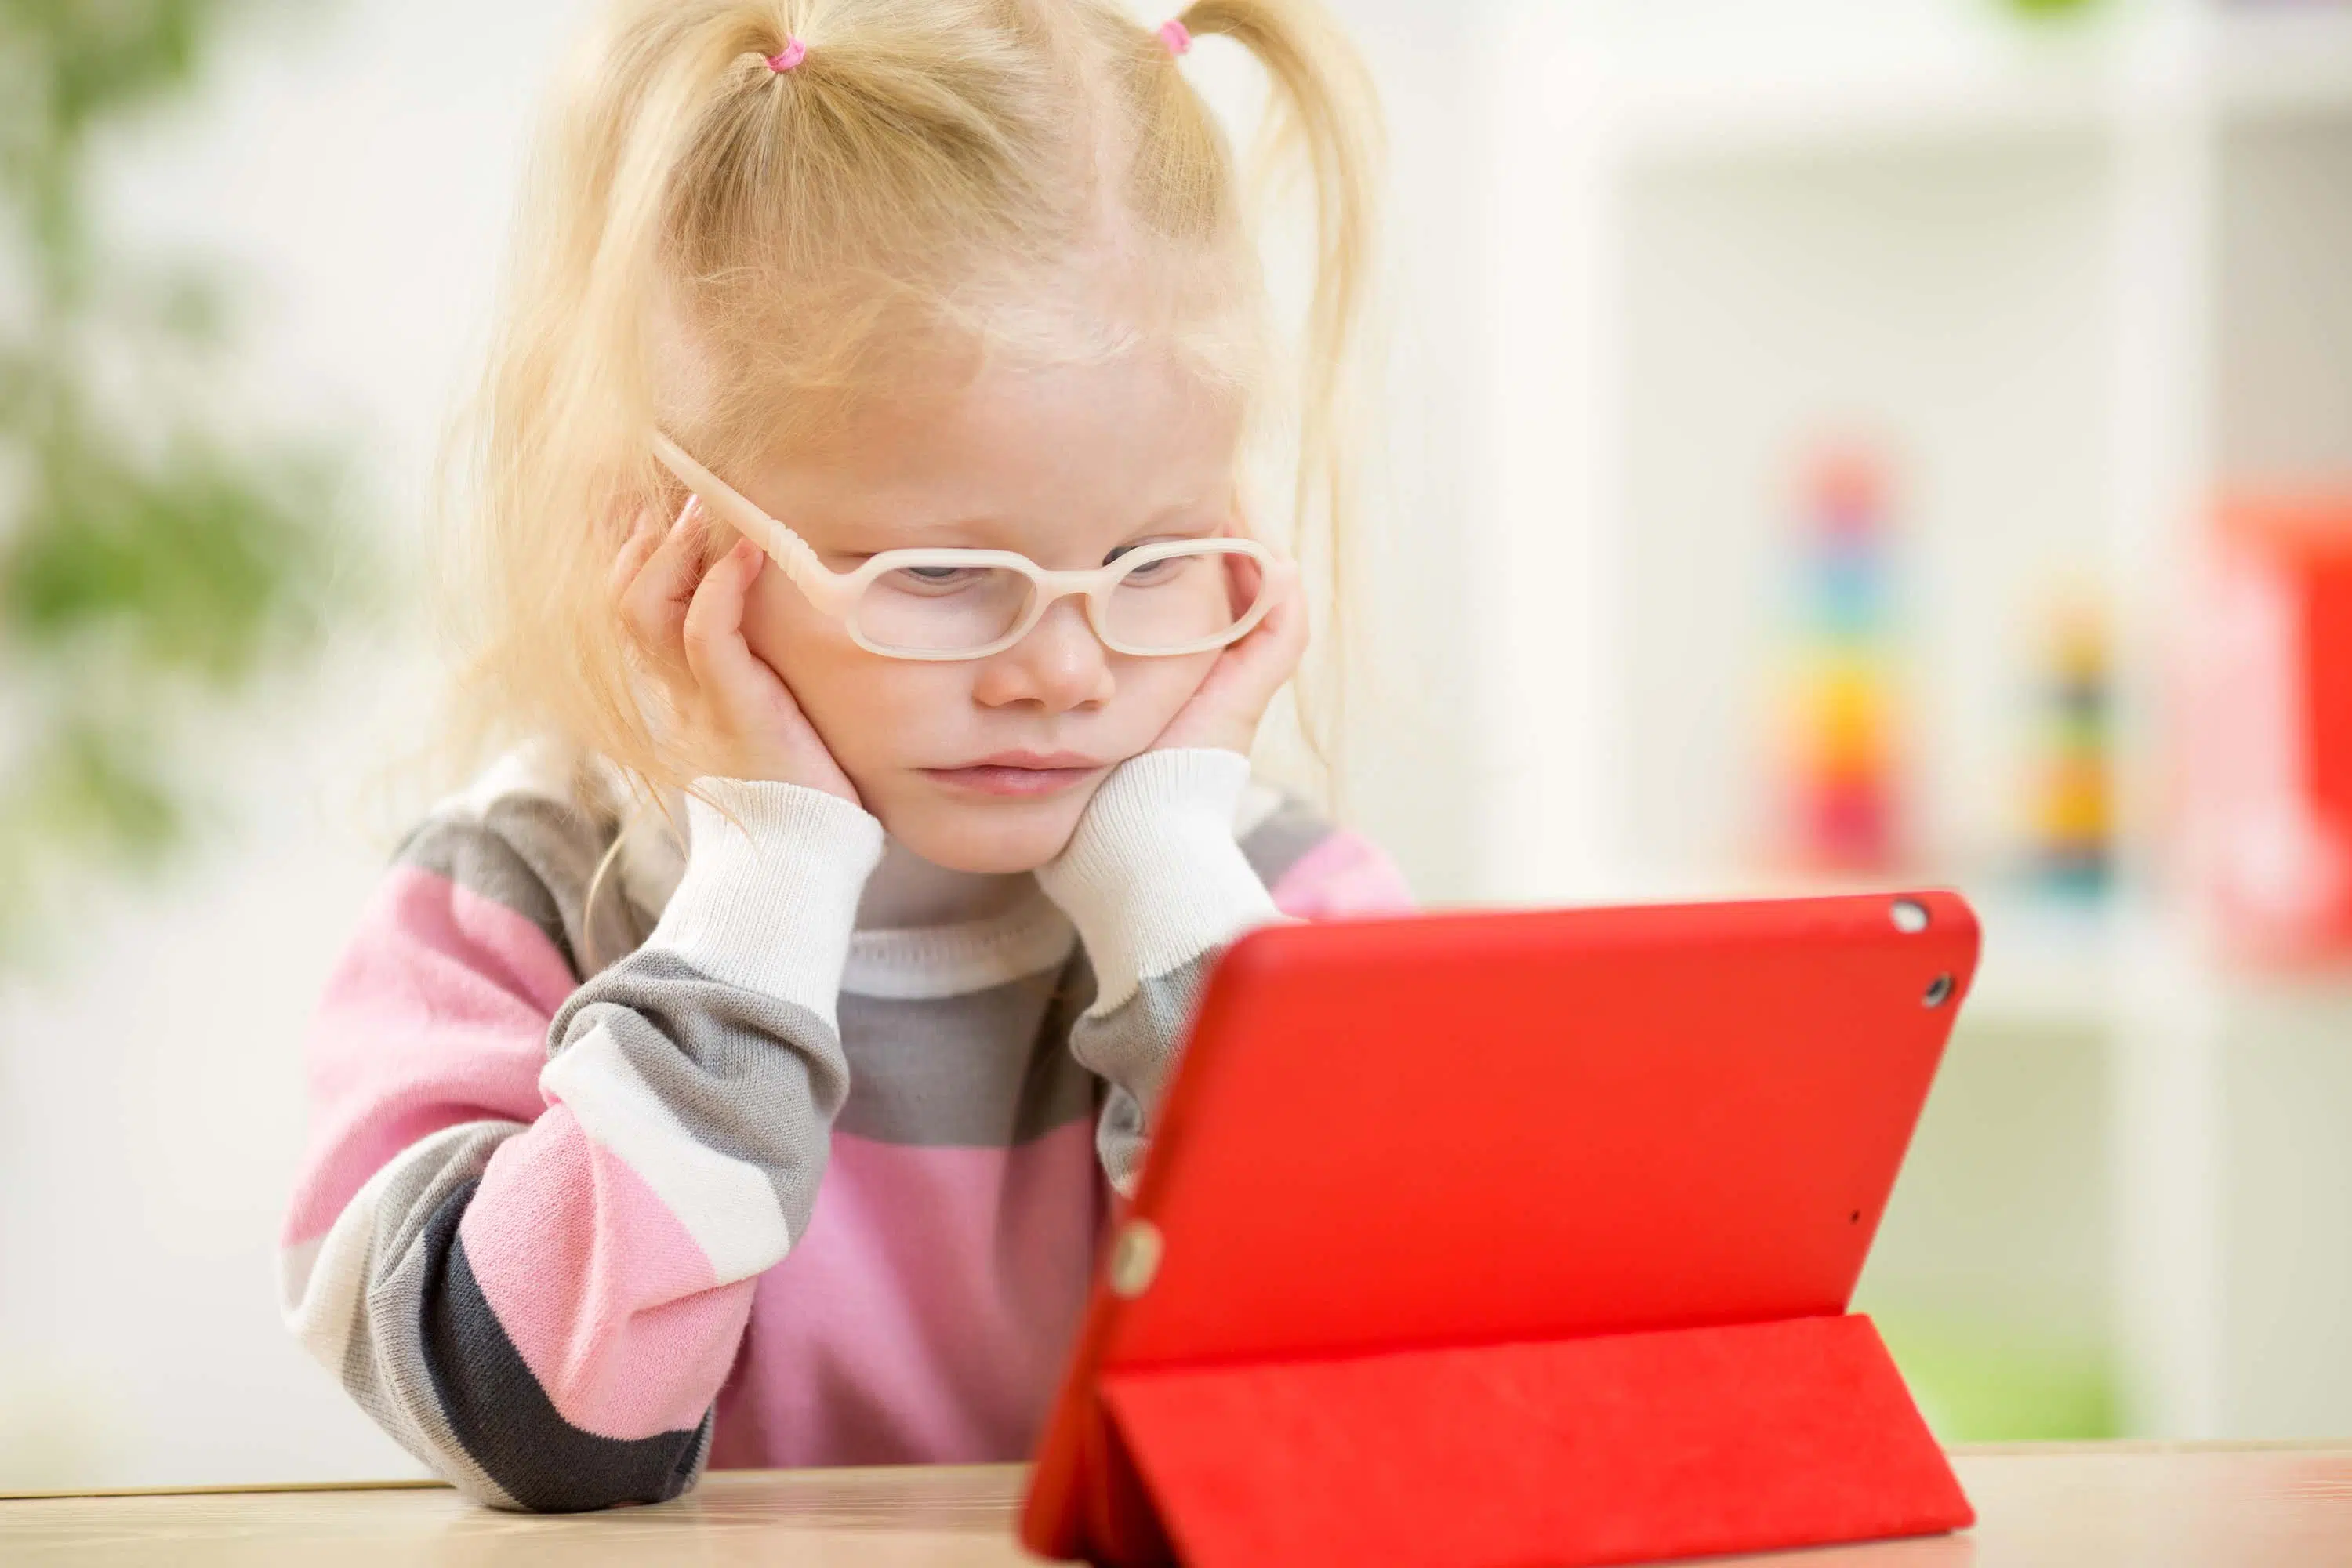 Child wearing glasses watches tablet scaled